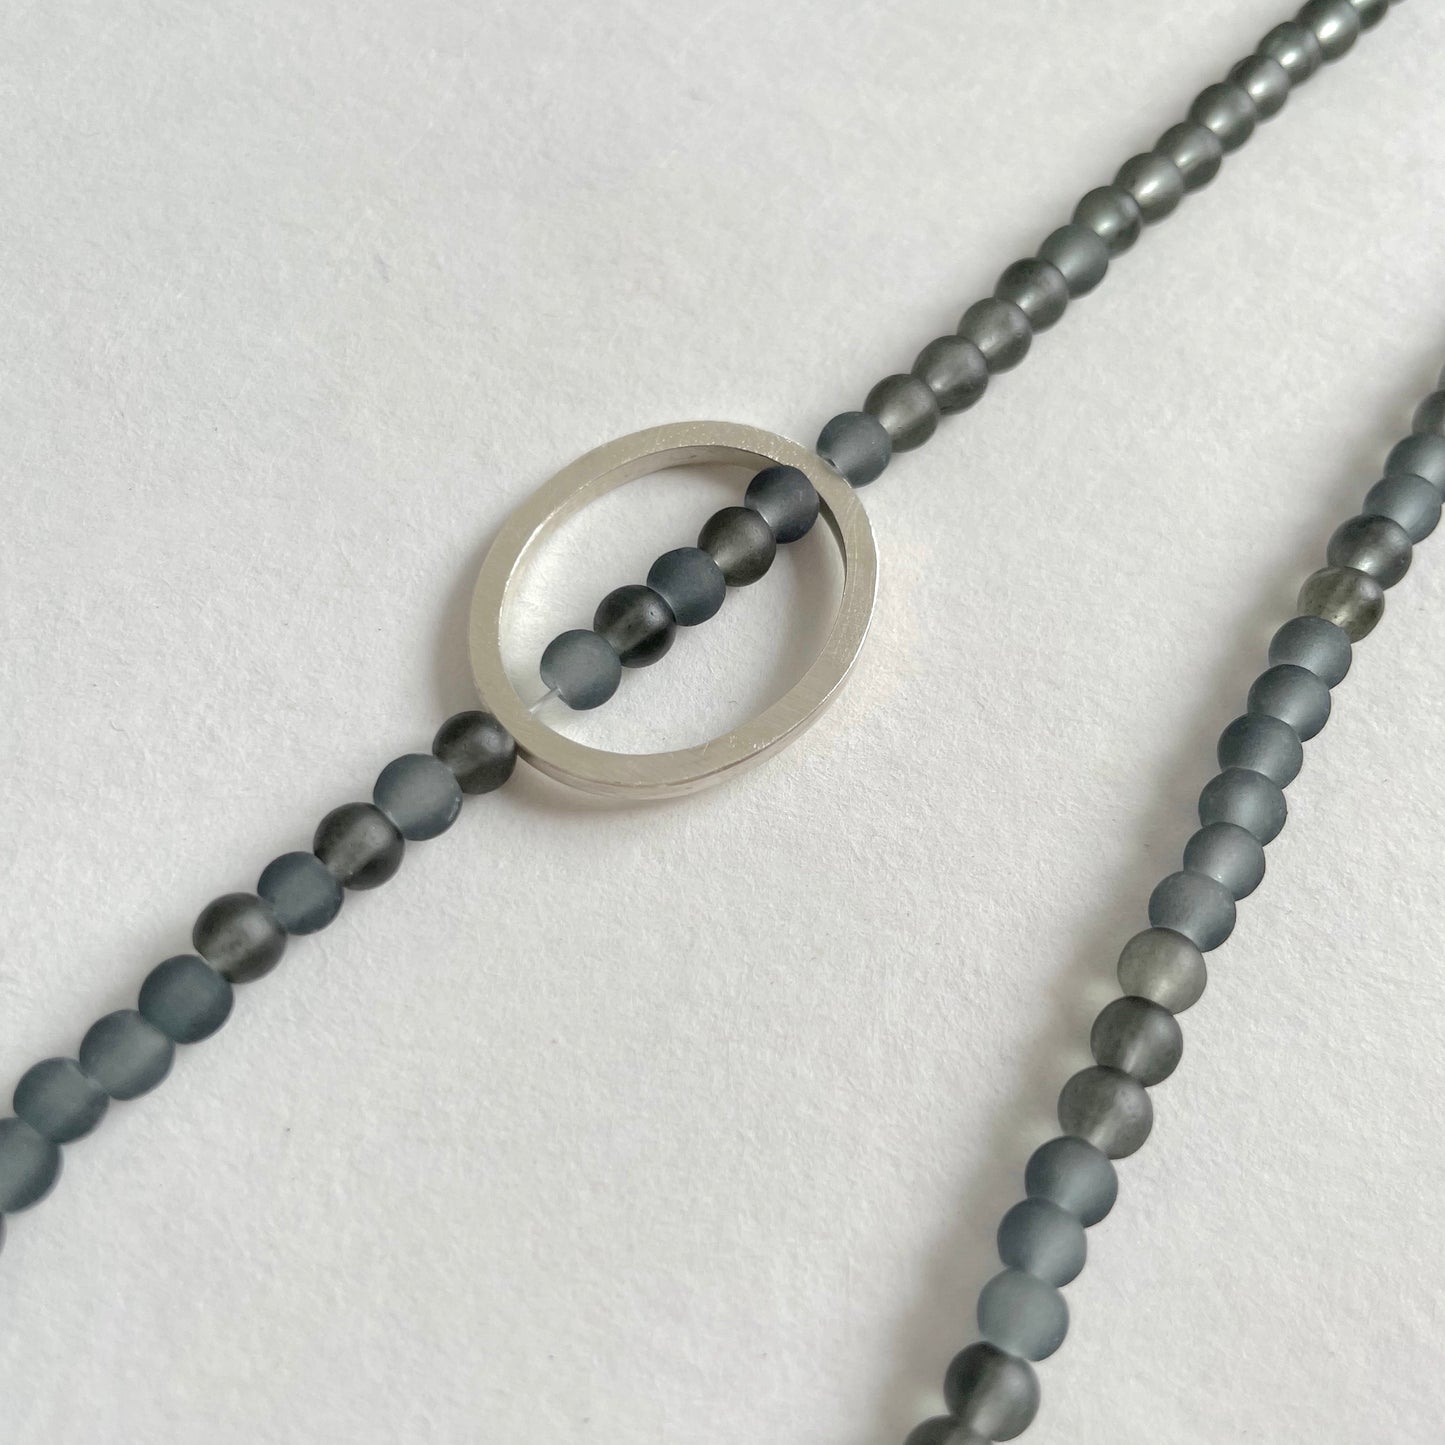 Grey Glass Bead Necklace with a Silver Pebble